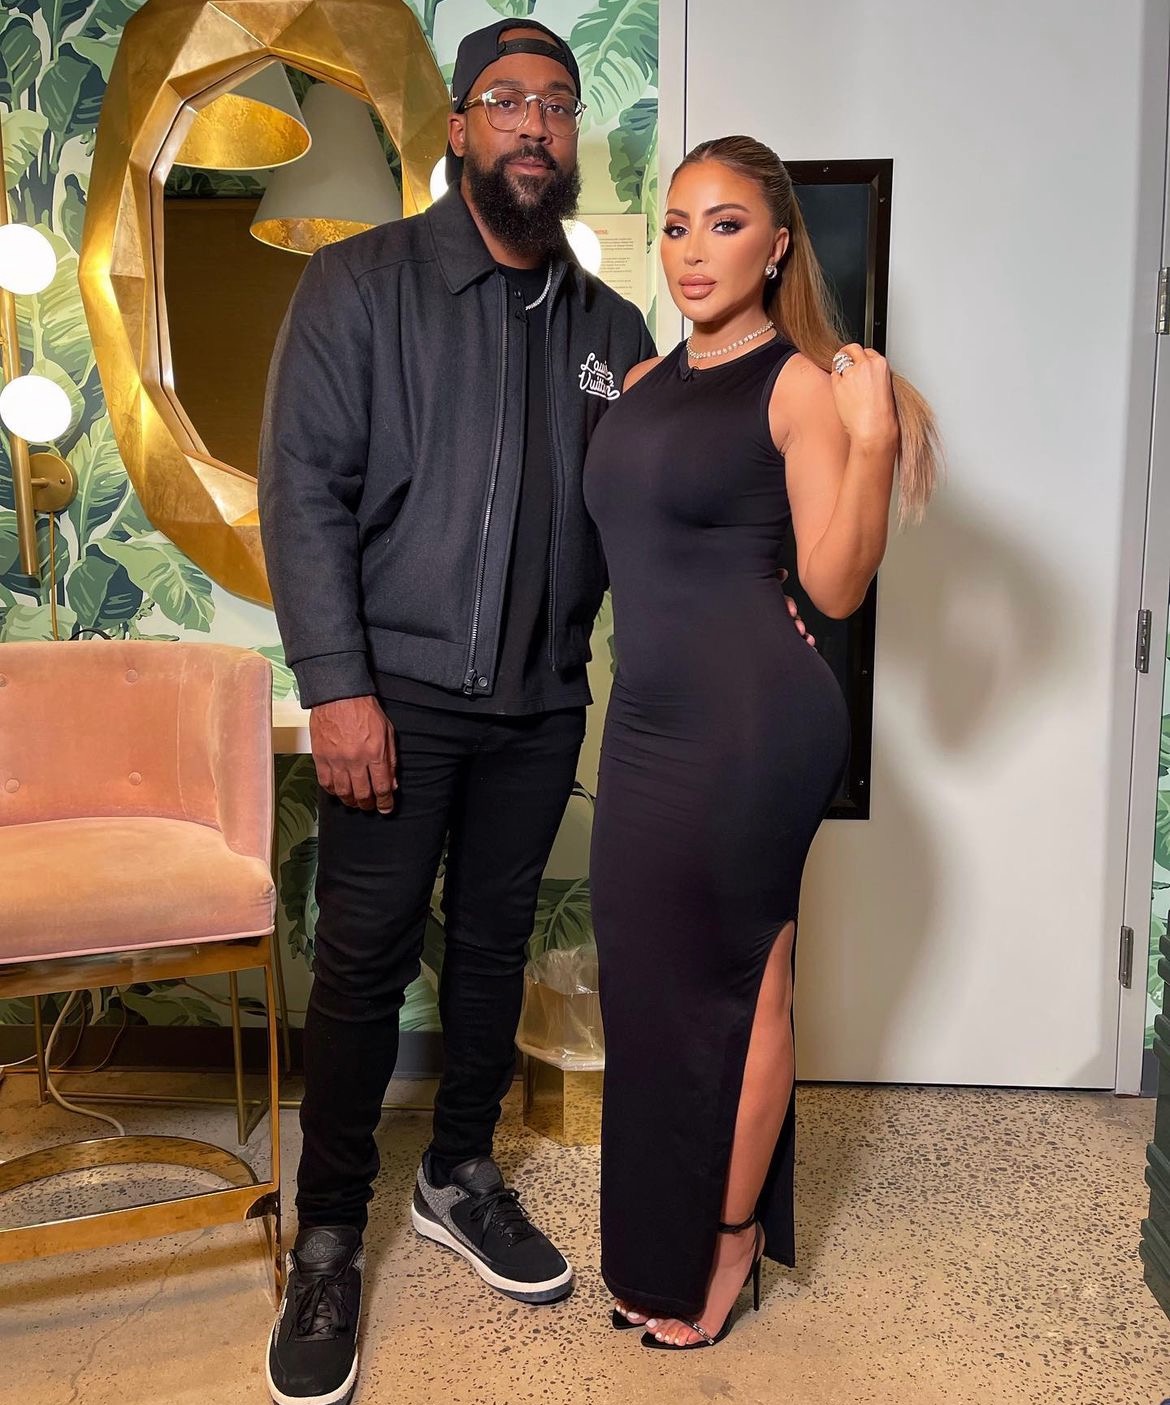 Larsa Pippen On Brief Split With Marcus Jordan: 'I Was Very Emotional And Impulsive' + Addresses Claims Their Breakup Was 'Staged'